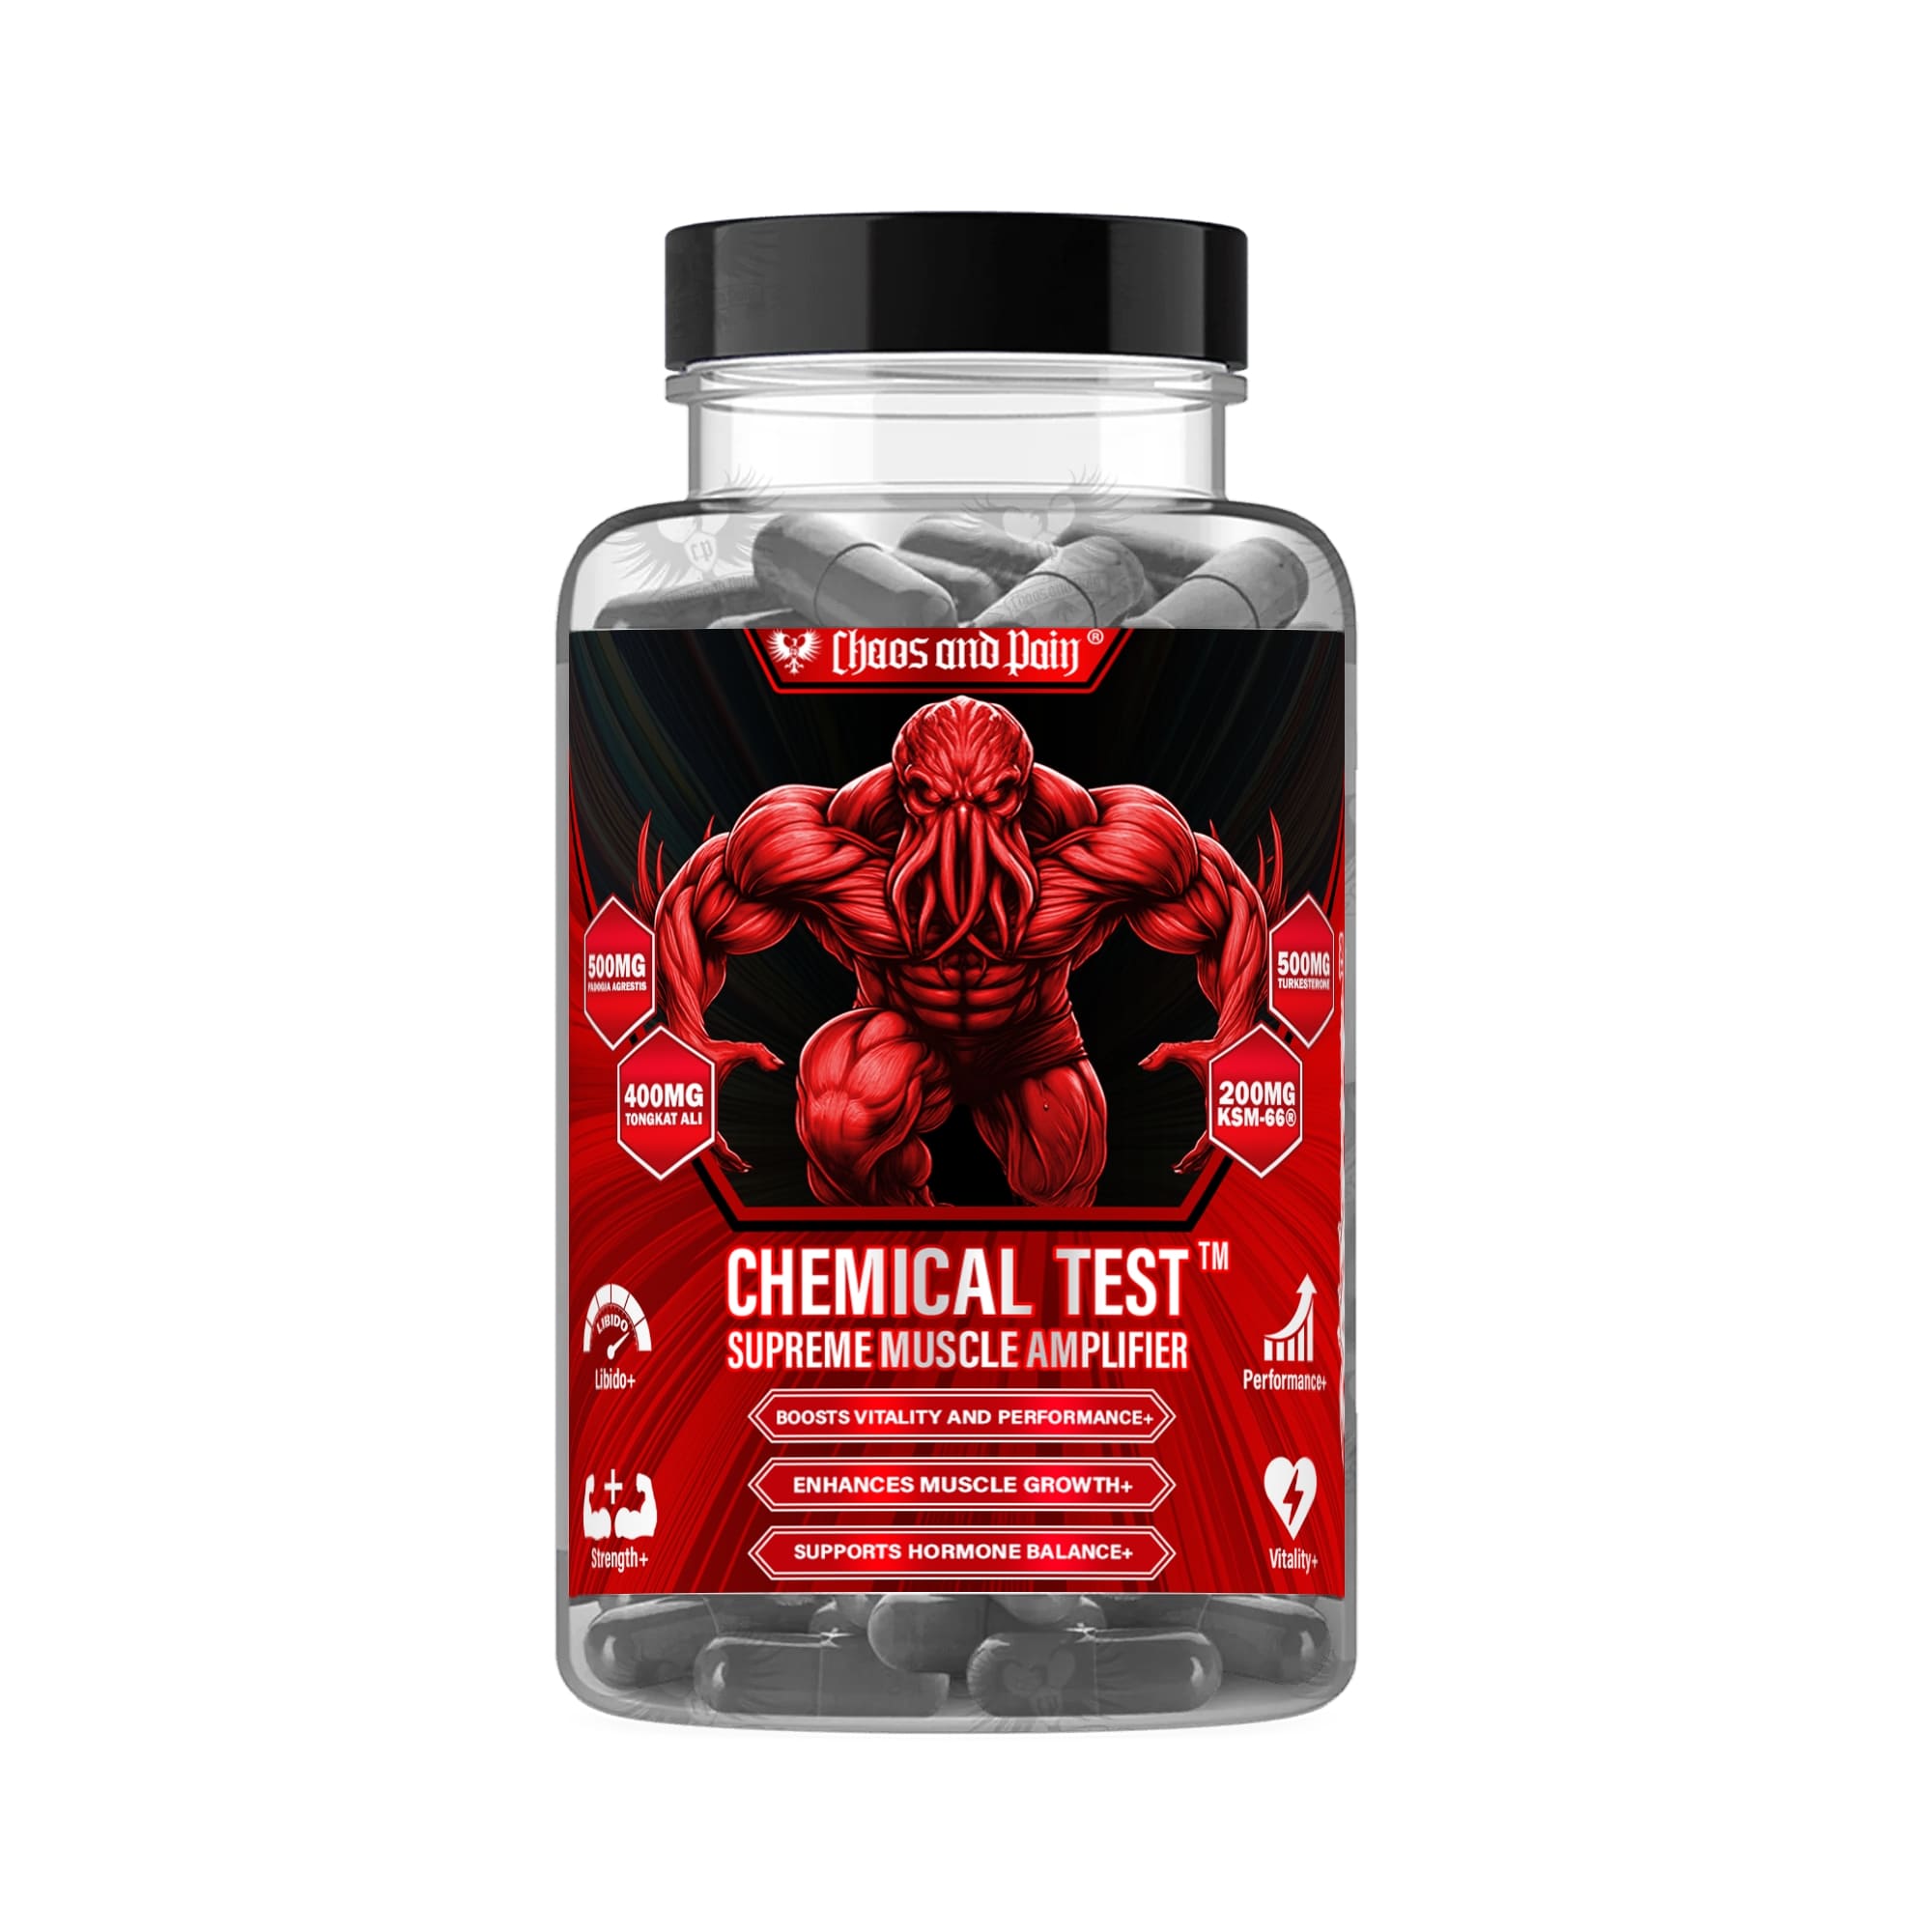 Chemical Test - Supreme Muscle Amplifier